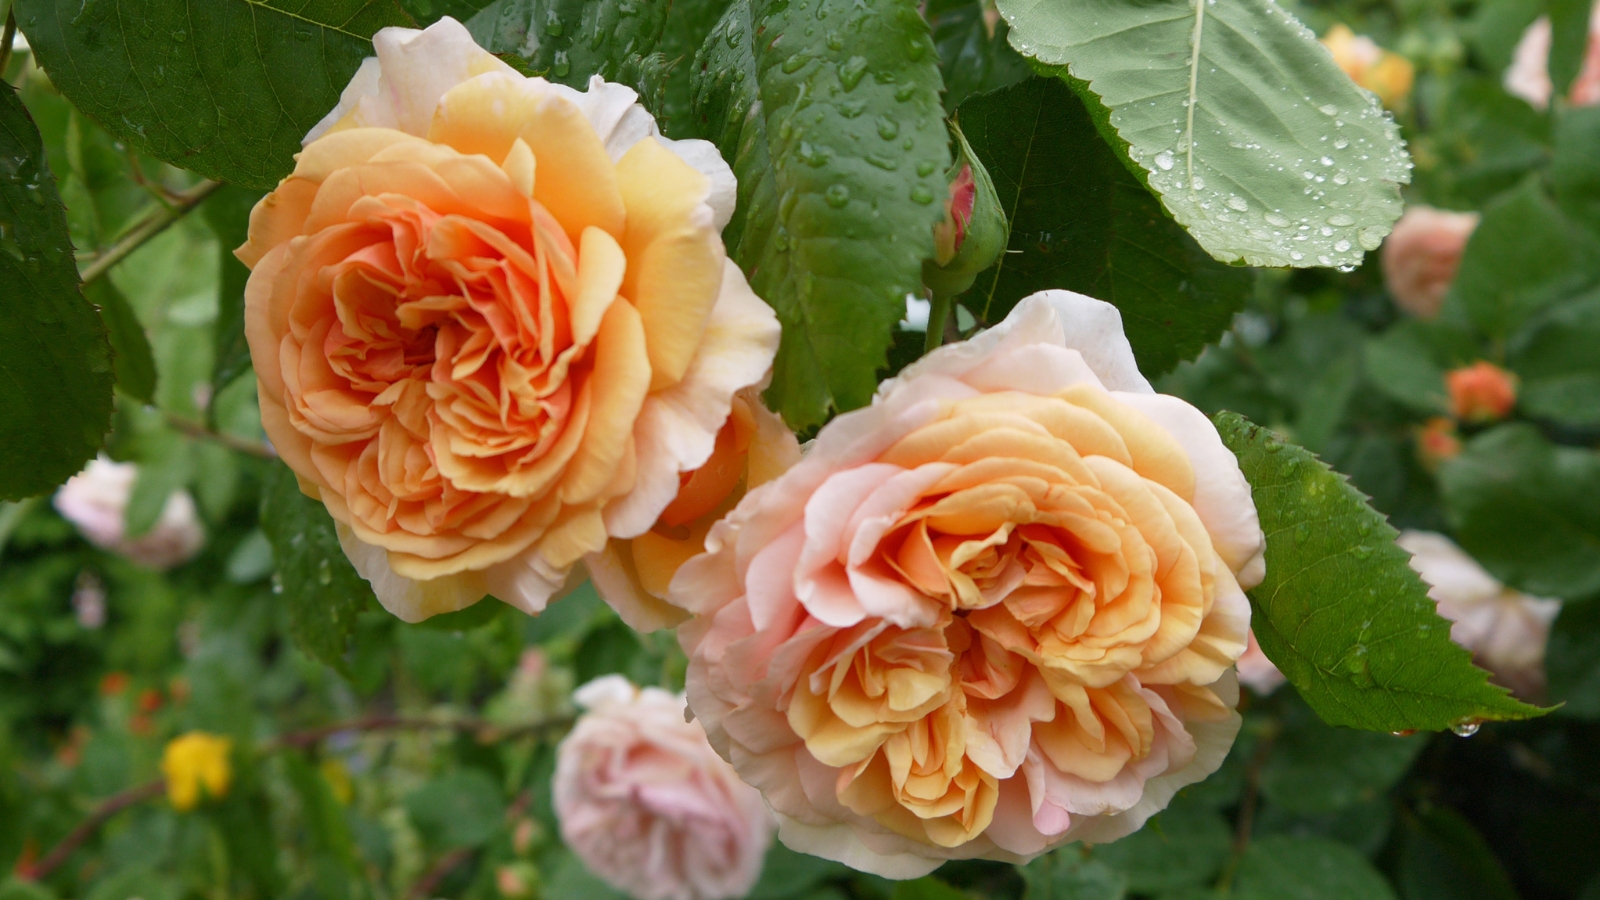 'Fun in the Sun' roses, their apricot petals like sunlit dreams, sway gently among moist, green leaves, a vibrant celebration of nature's beauty.